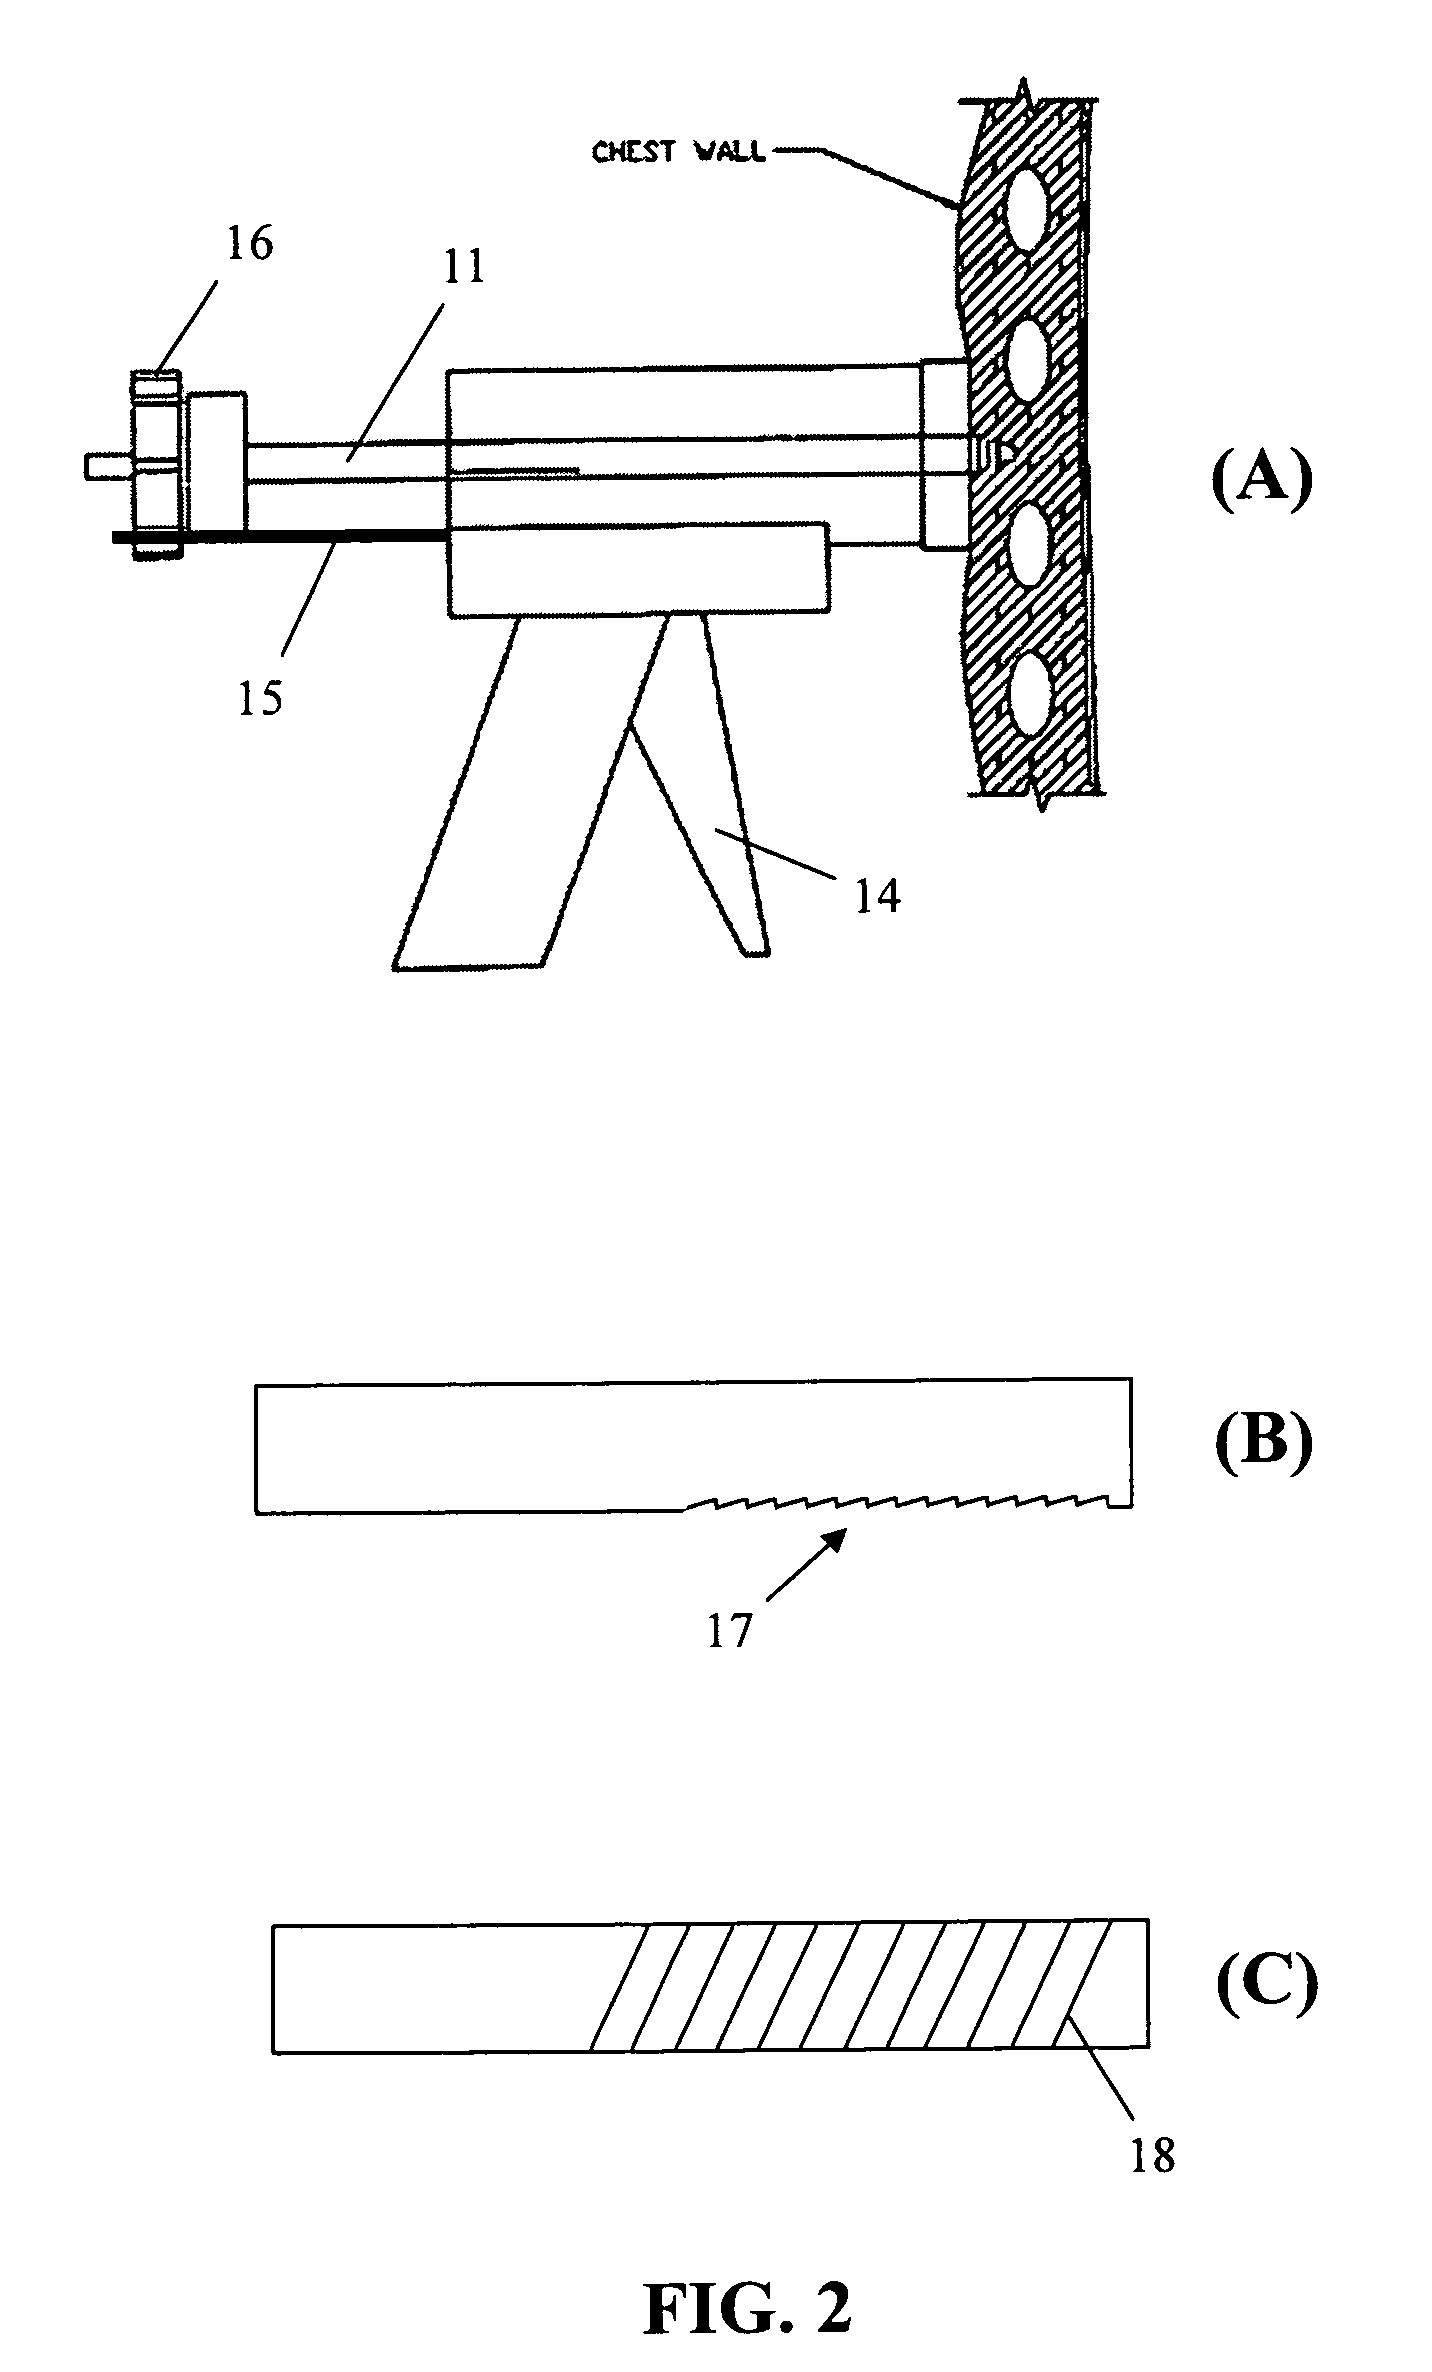 Apparatus and methods for safe and efficient placement of chest tubes